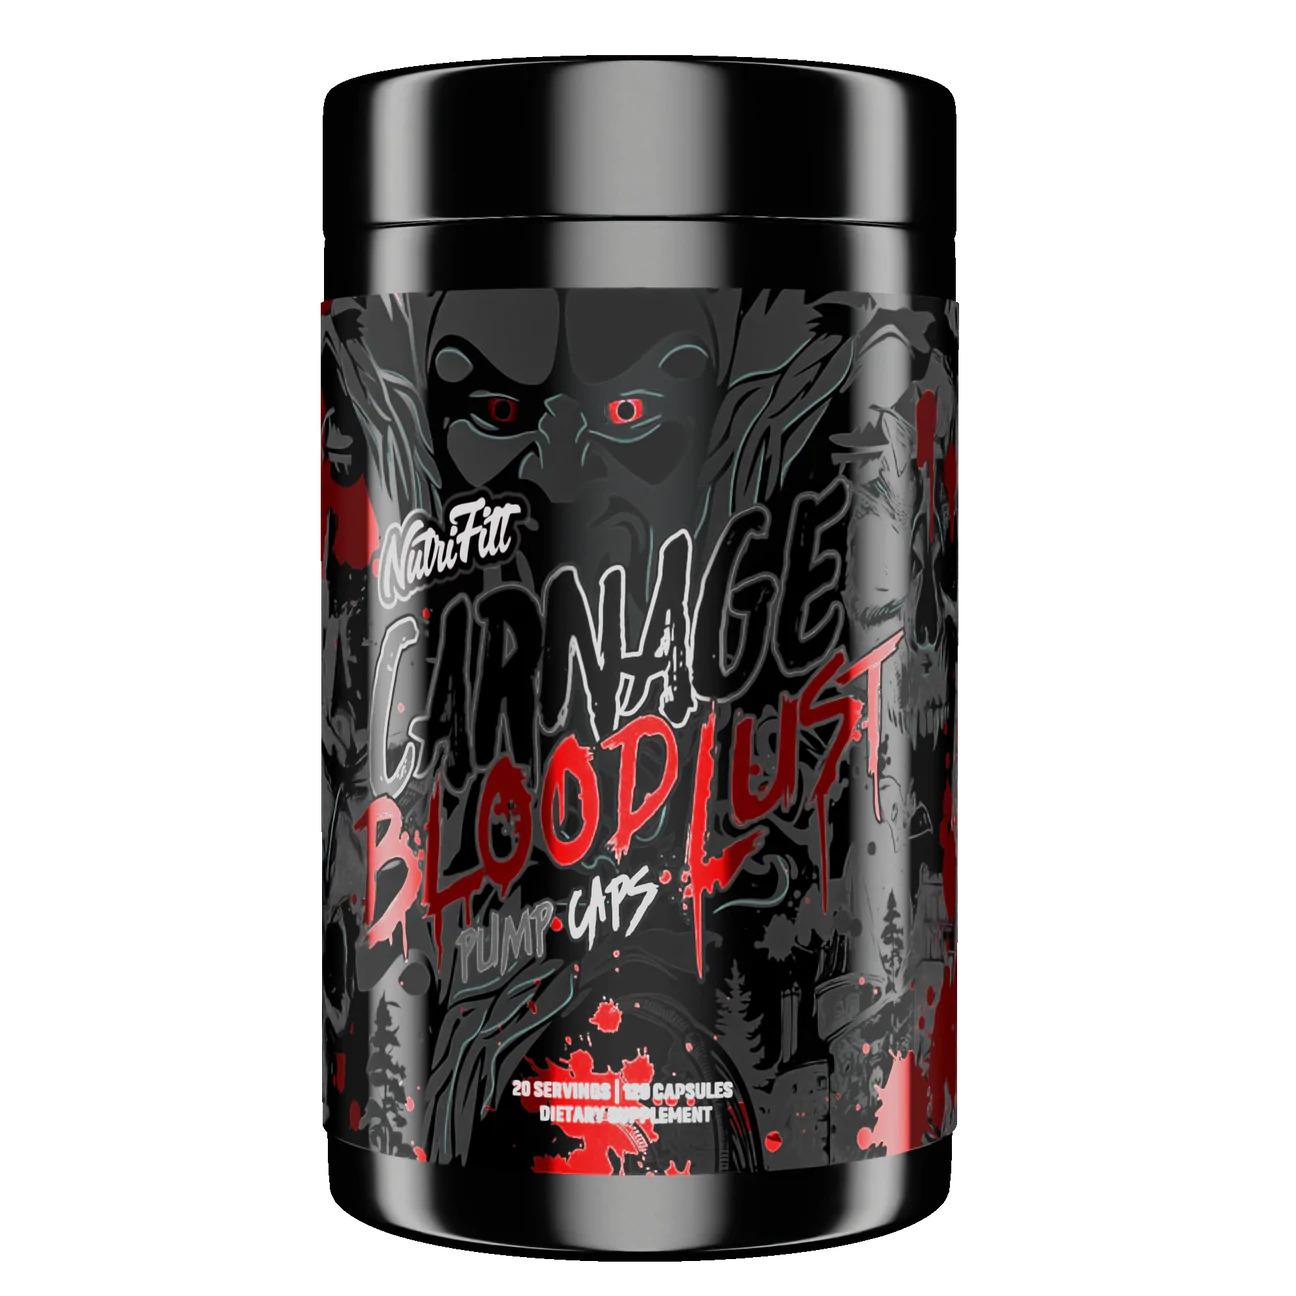 CARNAGE BLOODLUST PUMP CAPS (Pre Workout, Heart, Cardiovascular Health)-The Supplement Haven